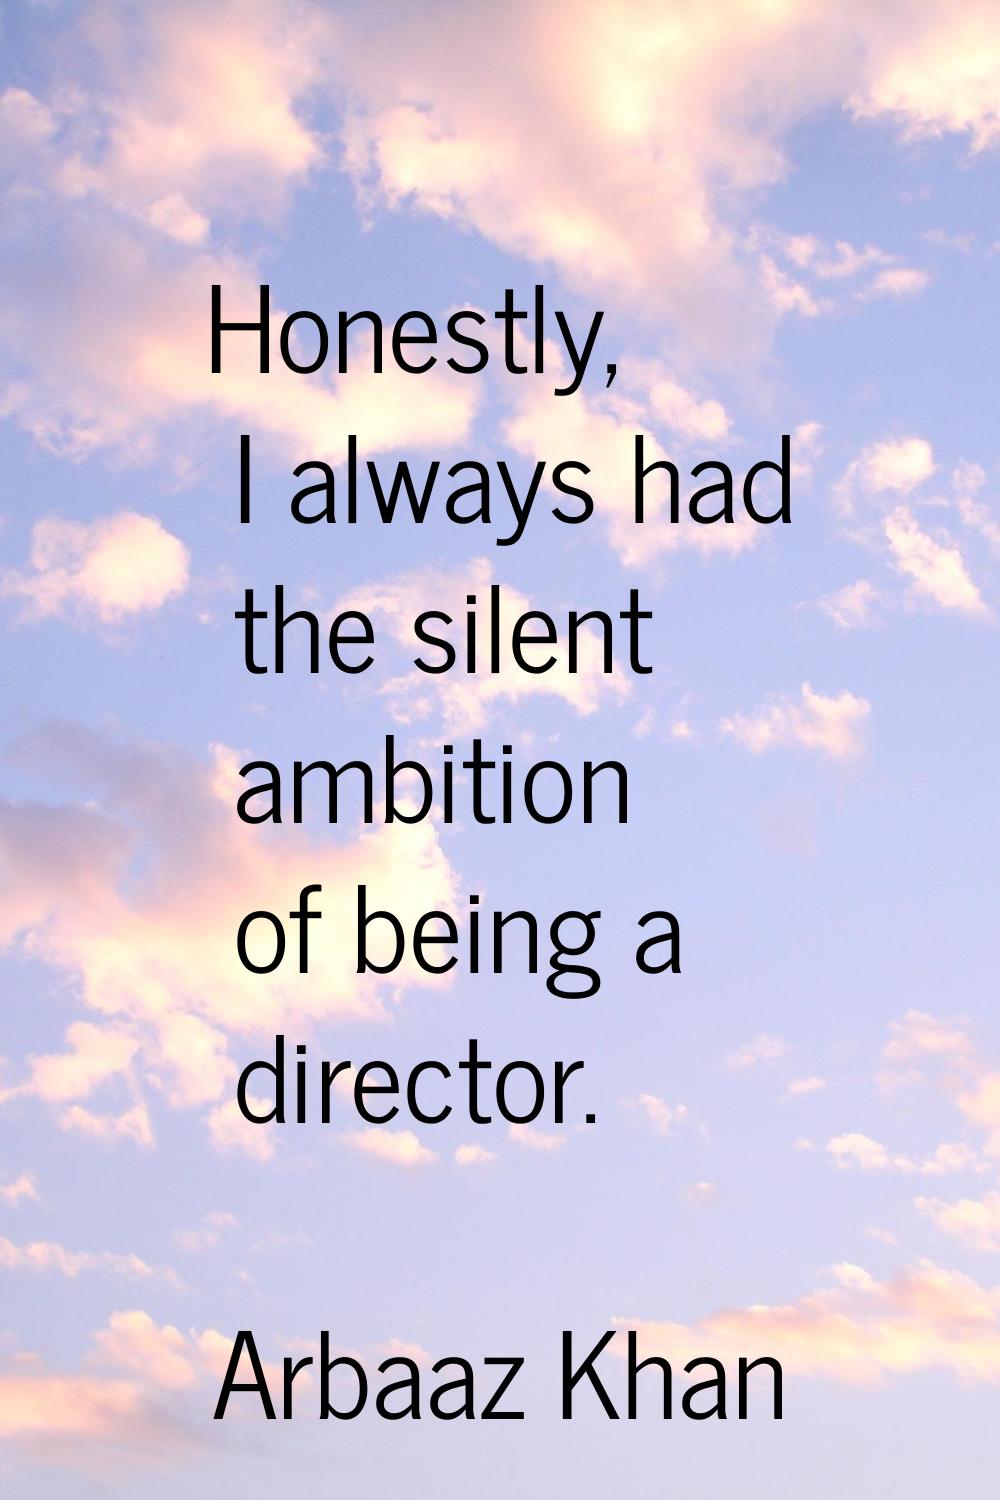 Honestly, I always had the silent ambition of being a director.